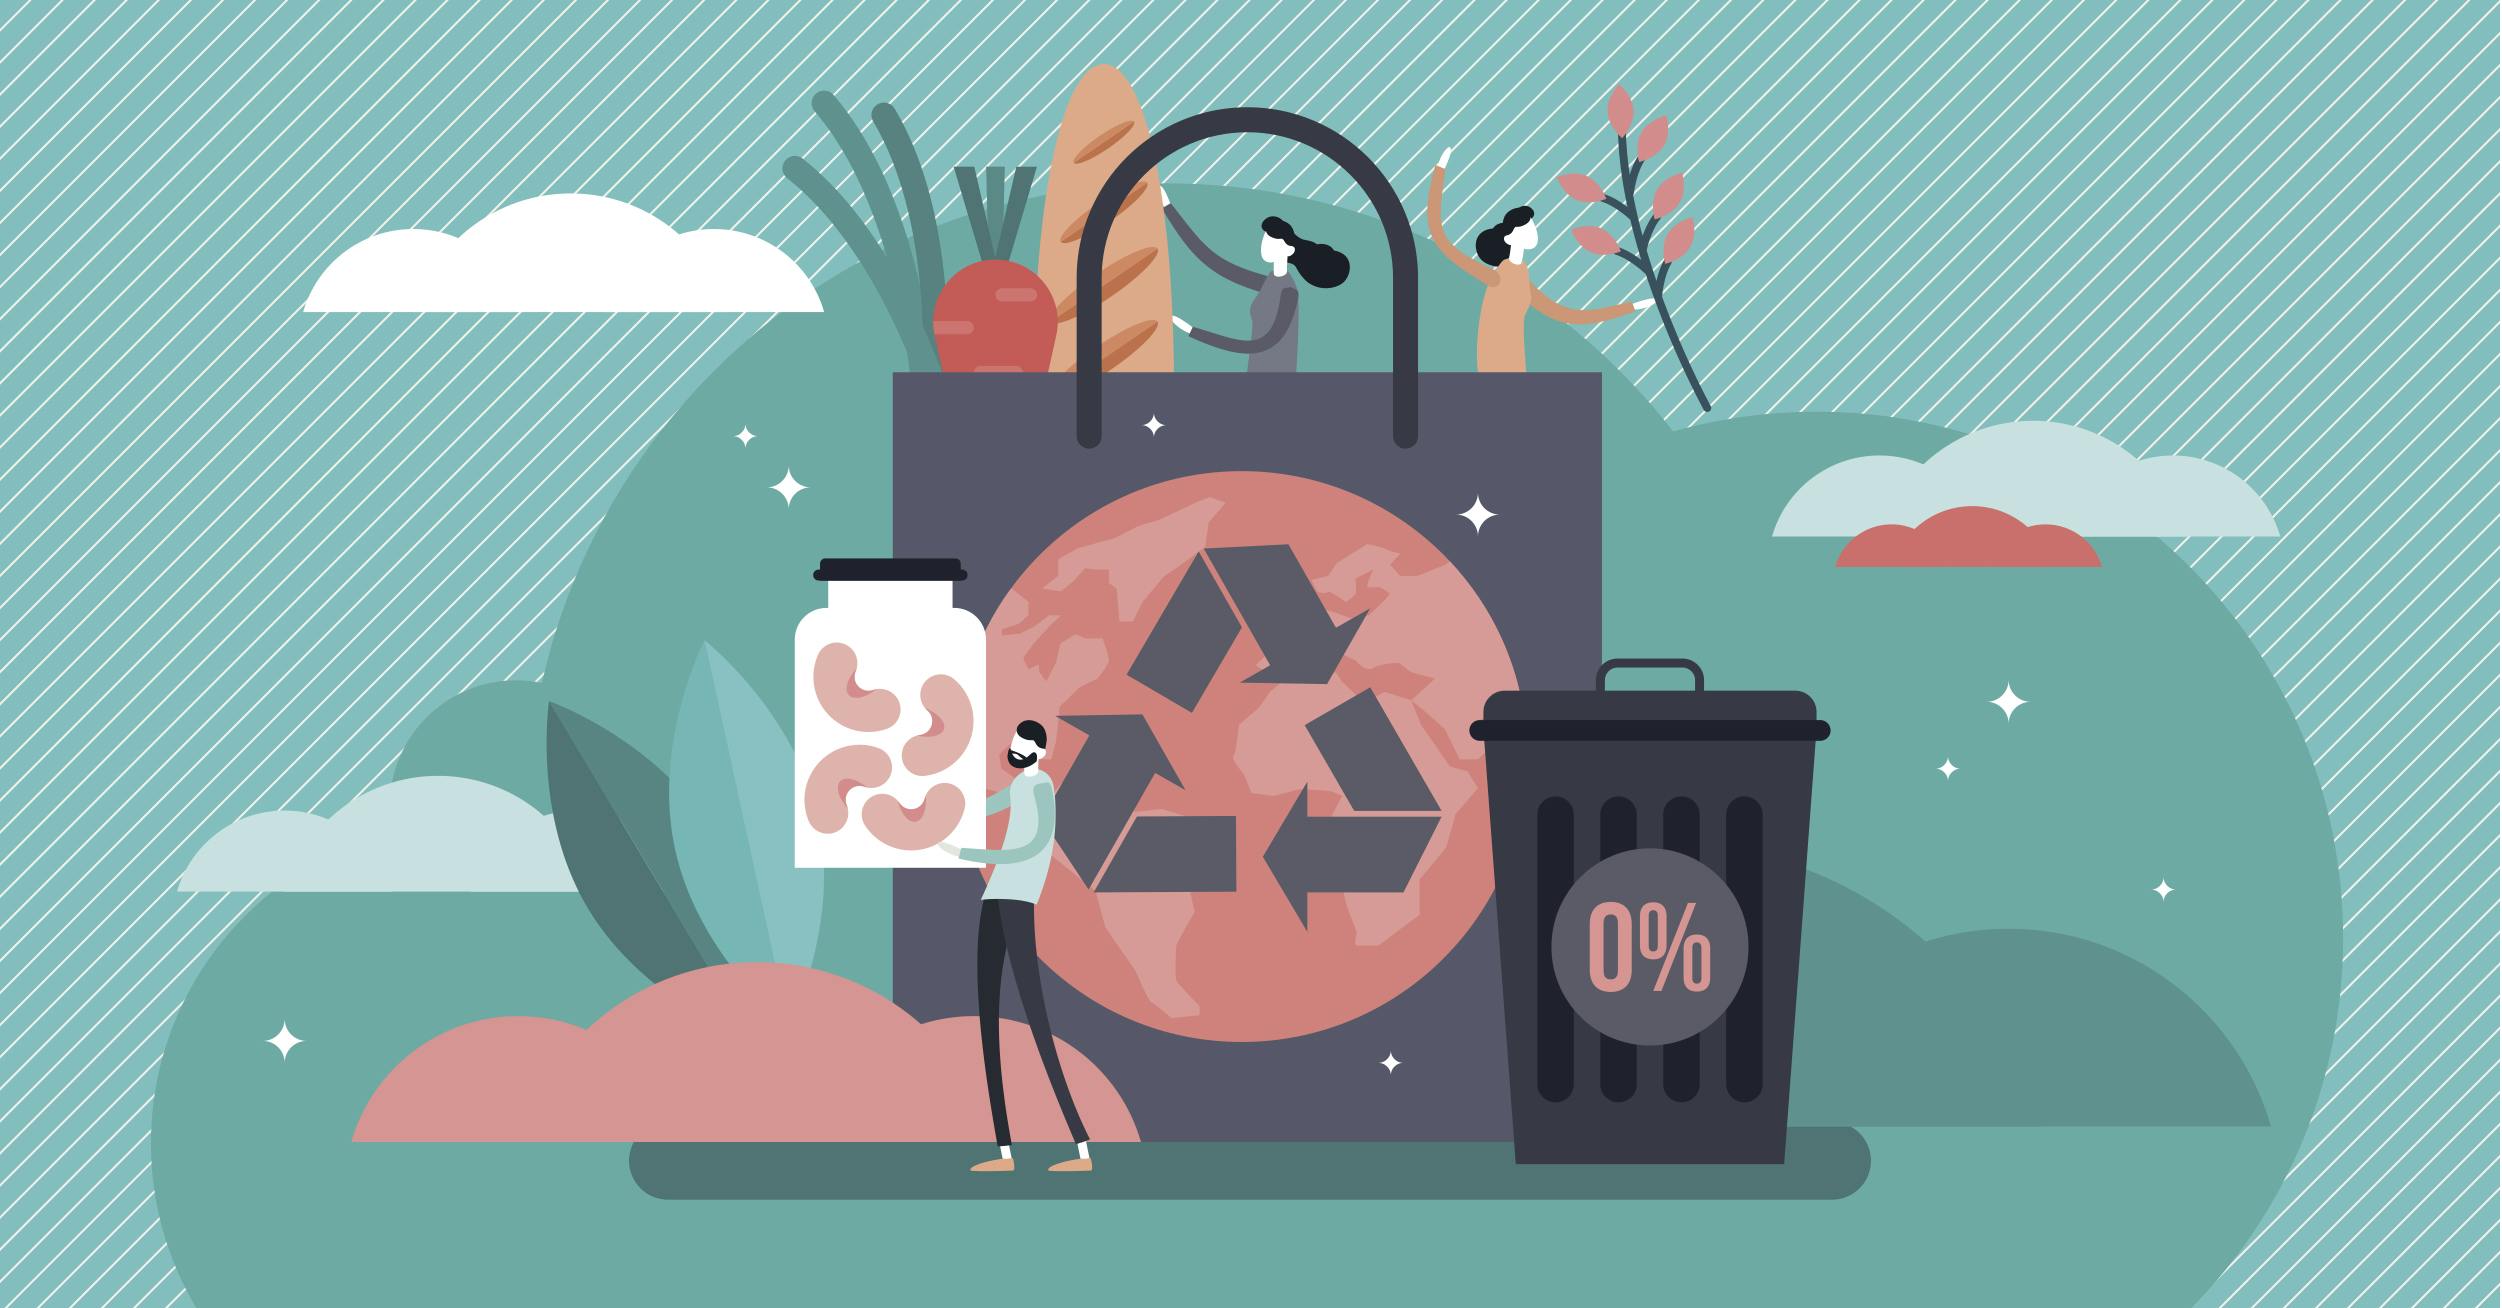 A graphic showing a large shopping bag with the recycling logo in centre, a rubbish bin with 0% annotated, and 3 people holding plastic-free food.